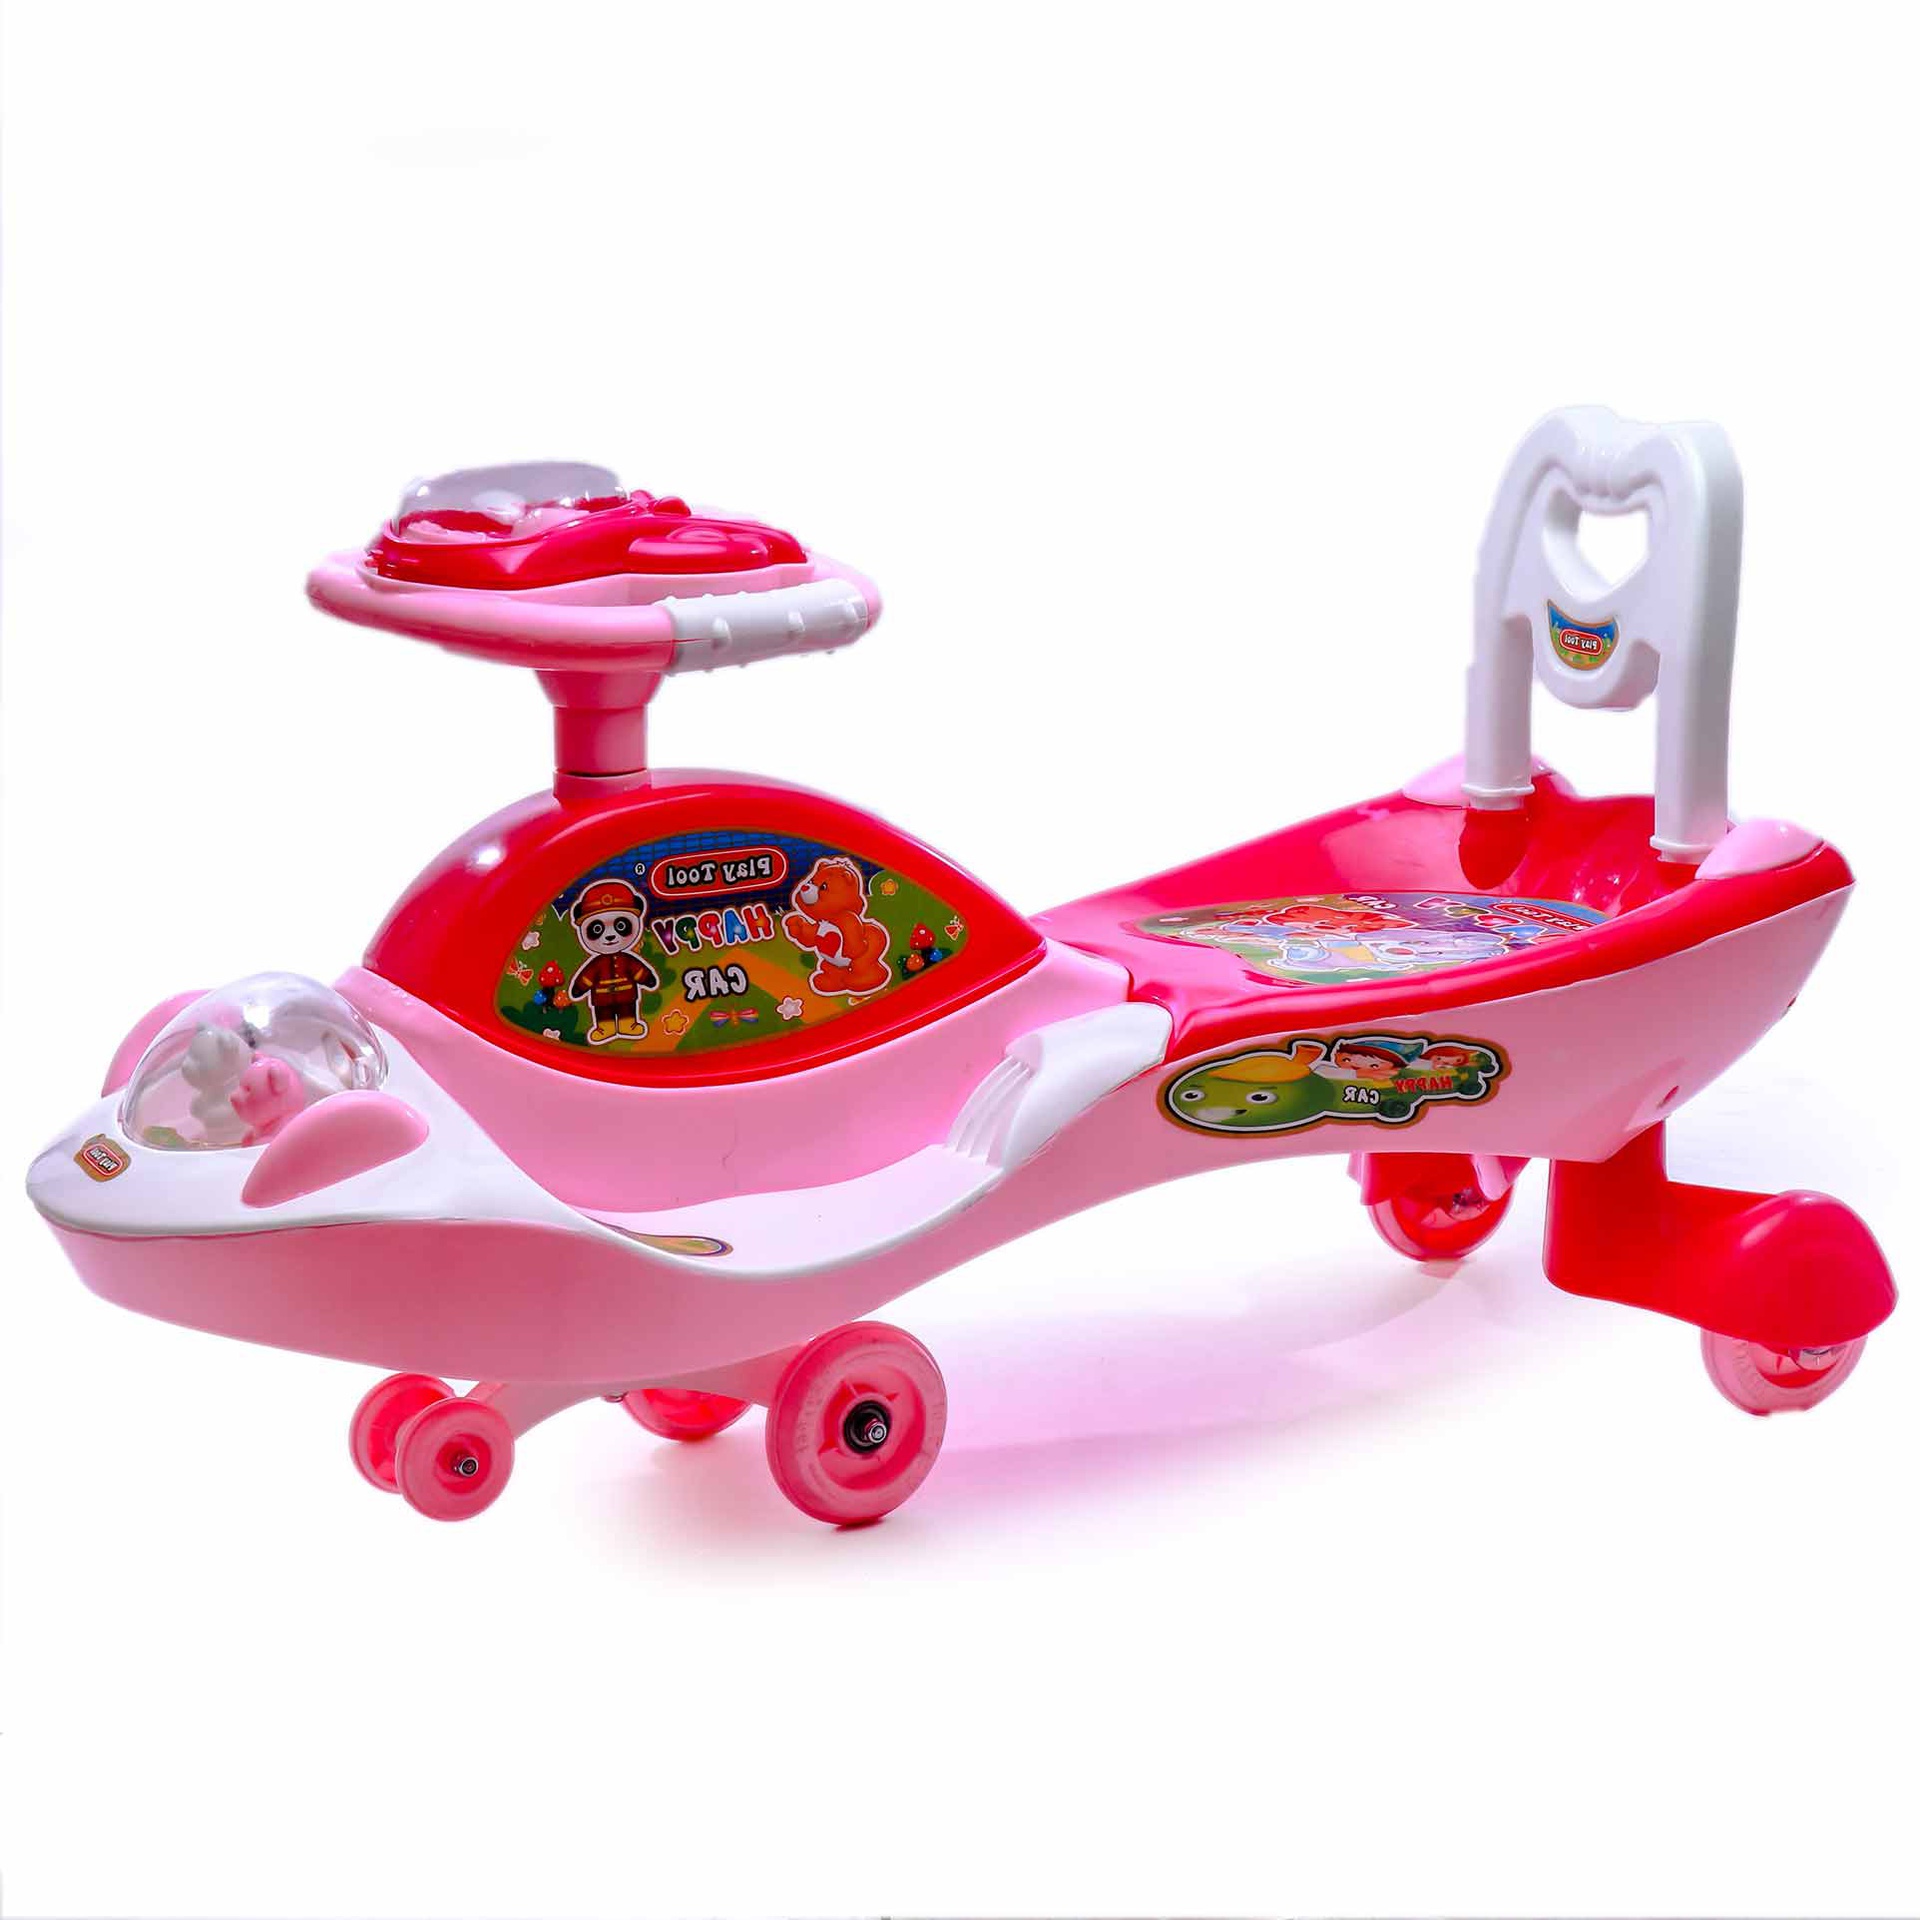 TooTwo Toys+Loonu Baby Car Happy Plastic Fancy Magic Ride-on Car / Twister Toy for Kids(B27841)